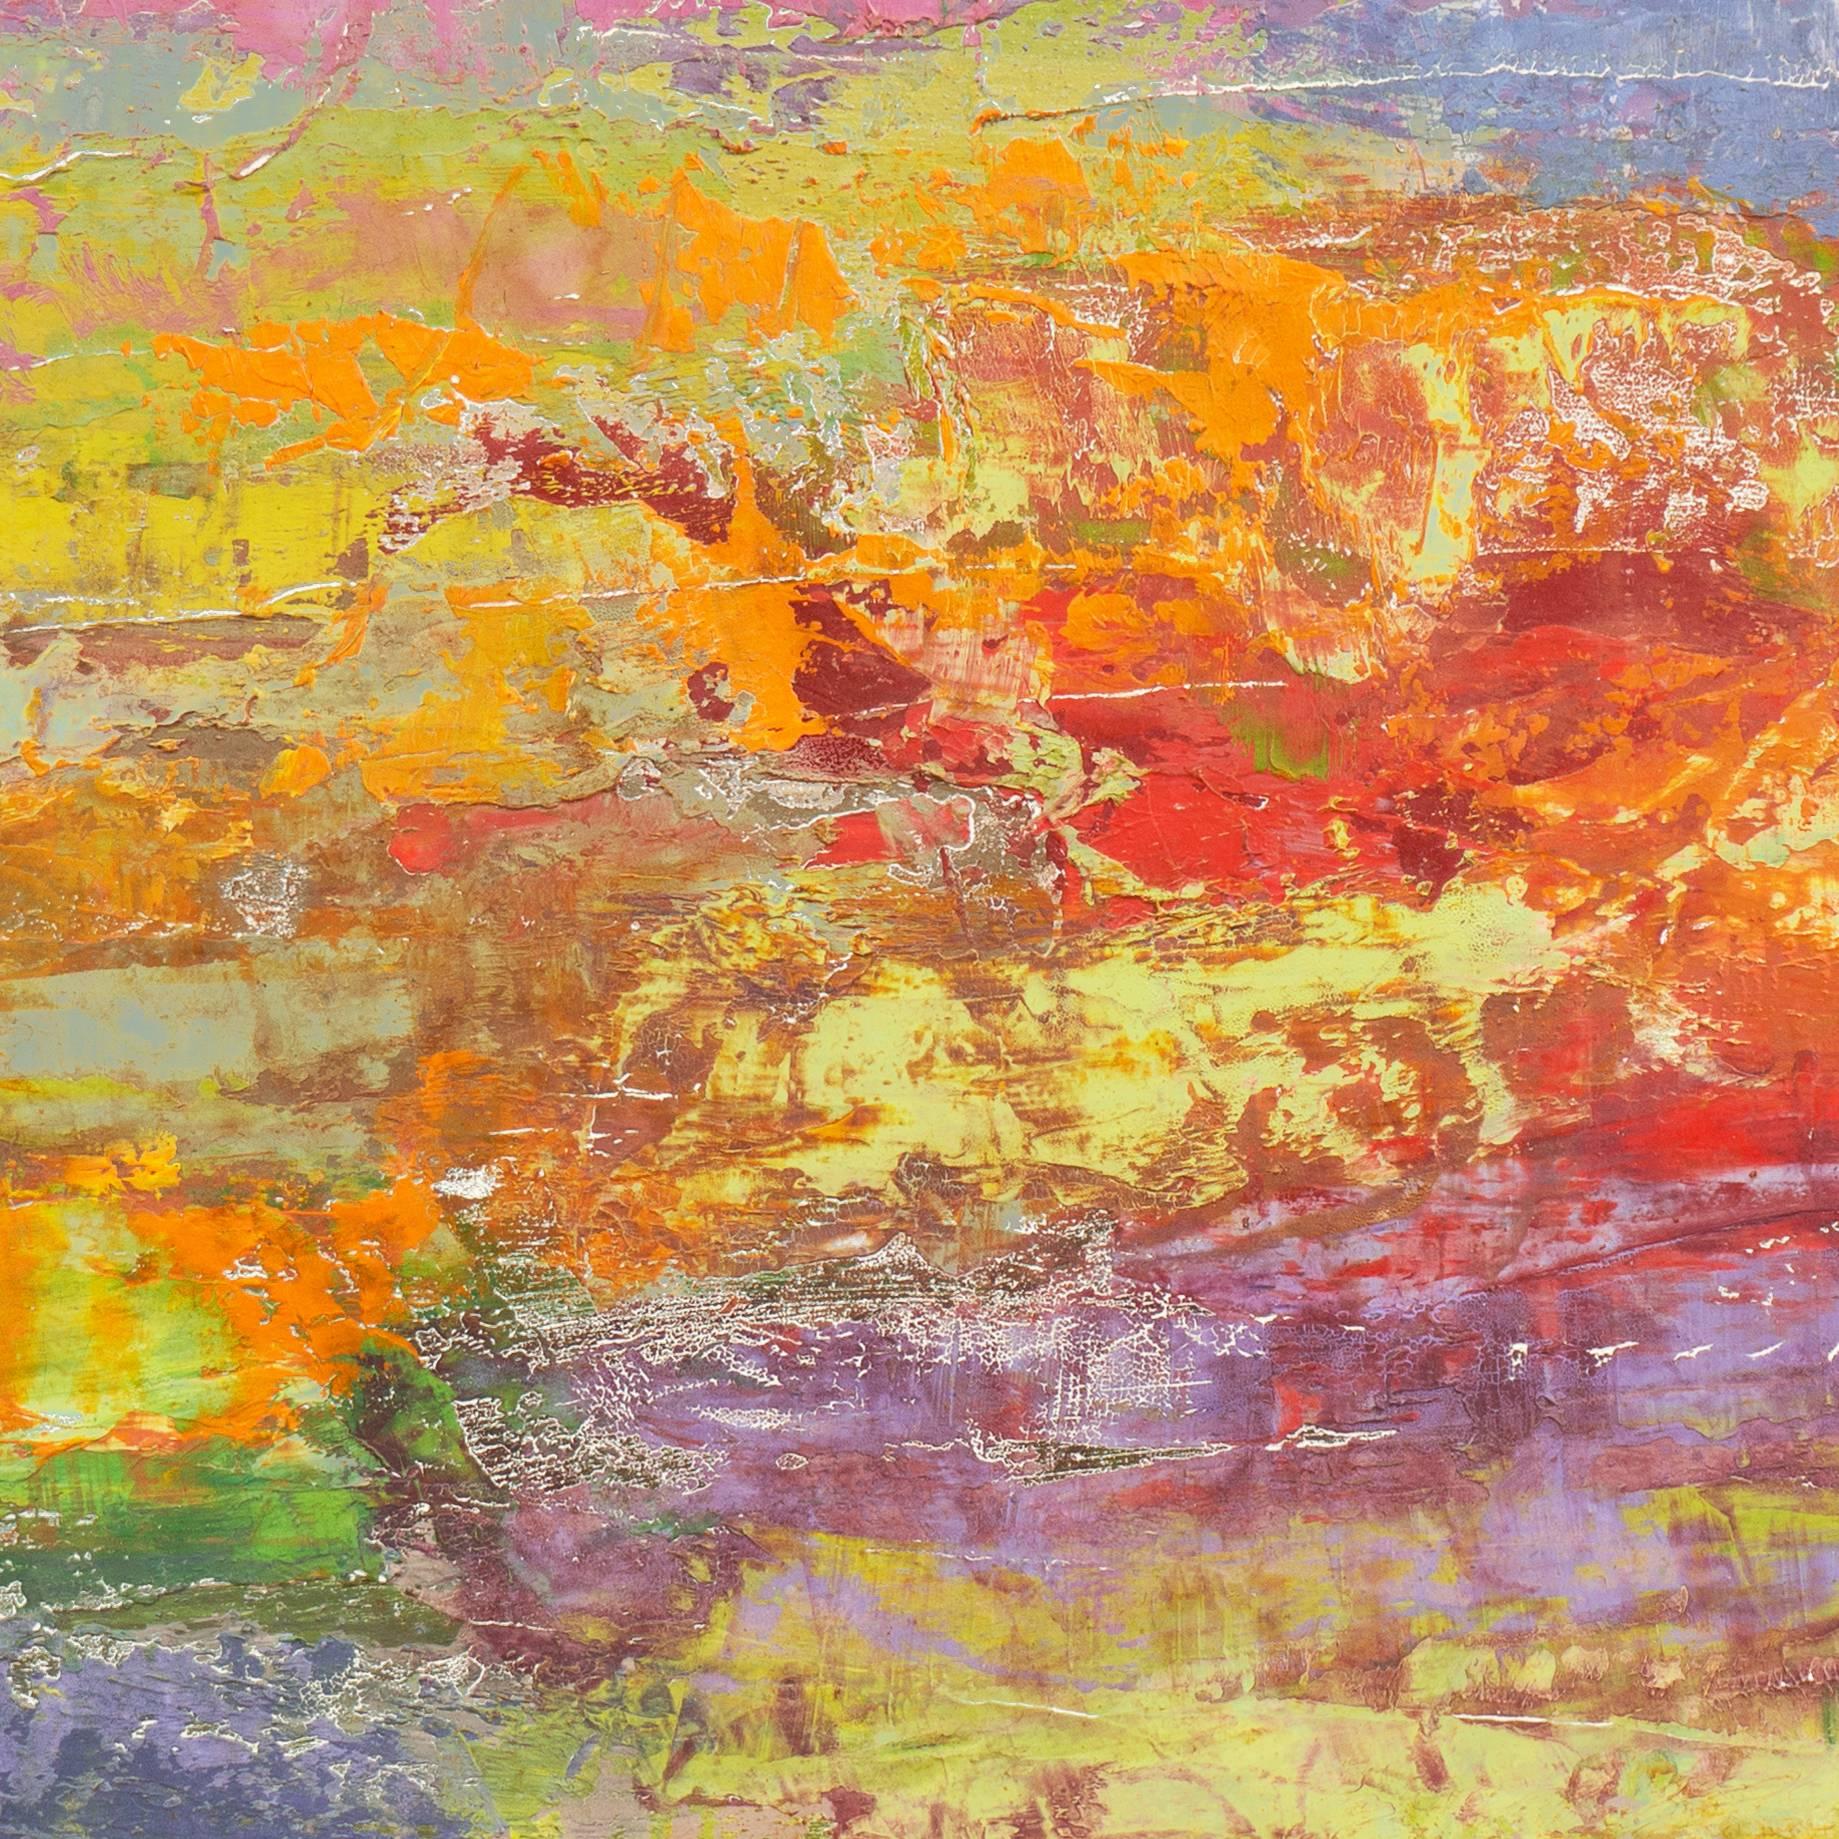 Abstracted Sunset Landscape   (Mid-century, American, Oil, Small) - Painting by Erwin Wending